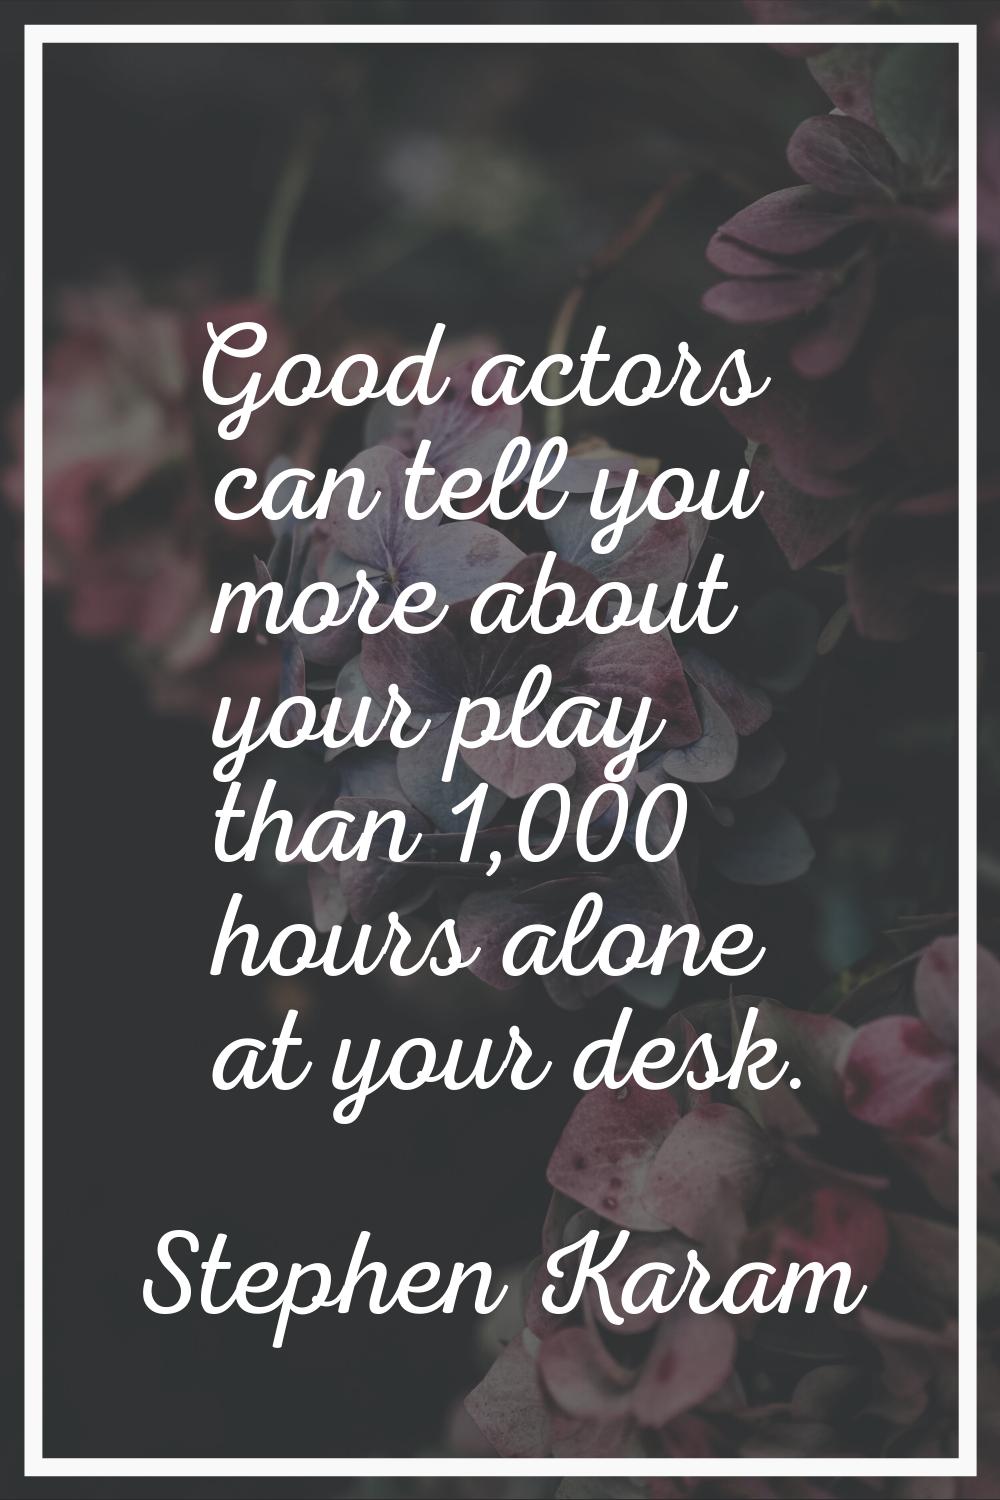 Good actors can tell you more about your play than 1,000 hours alone at your desk.